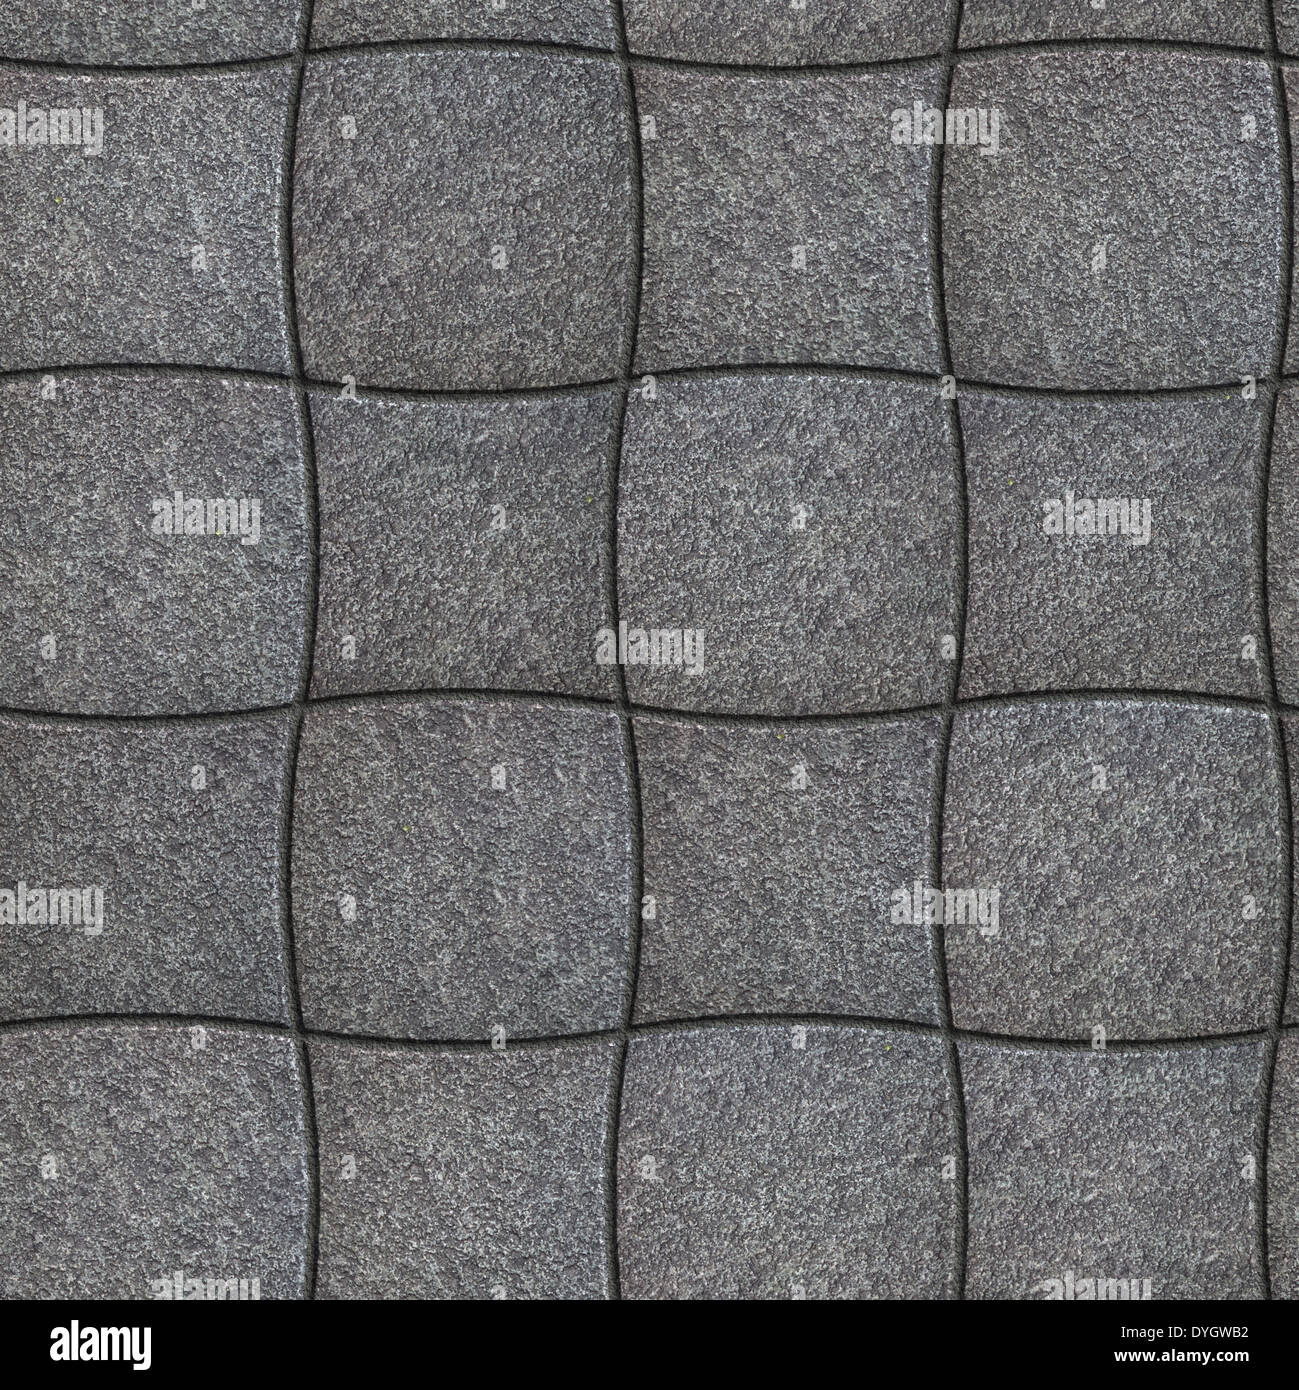 Decorative Gray Pavement of Concave and Convex Quadrilaterals. Seamless Tileable Texture. Stock Photo